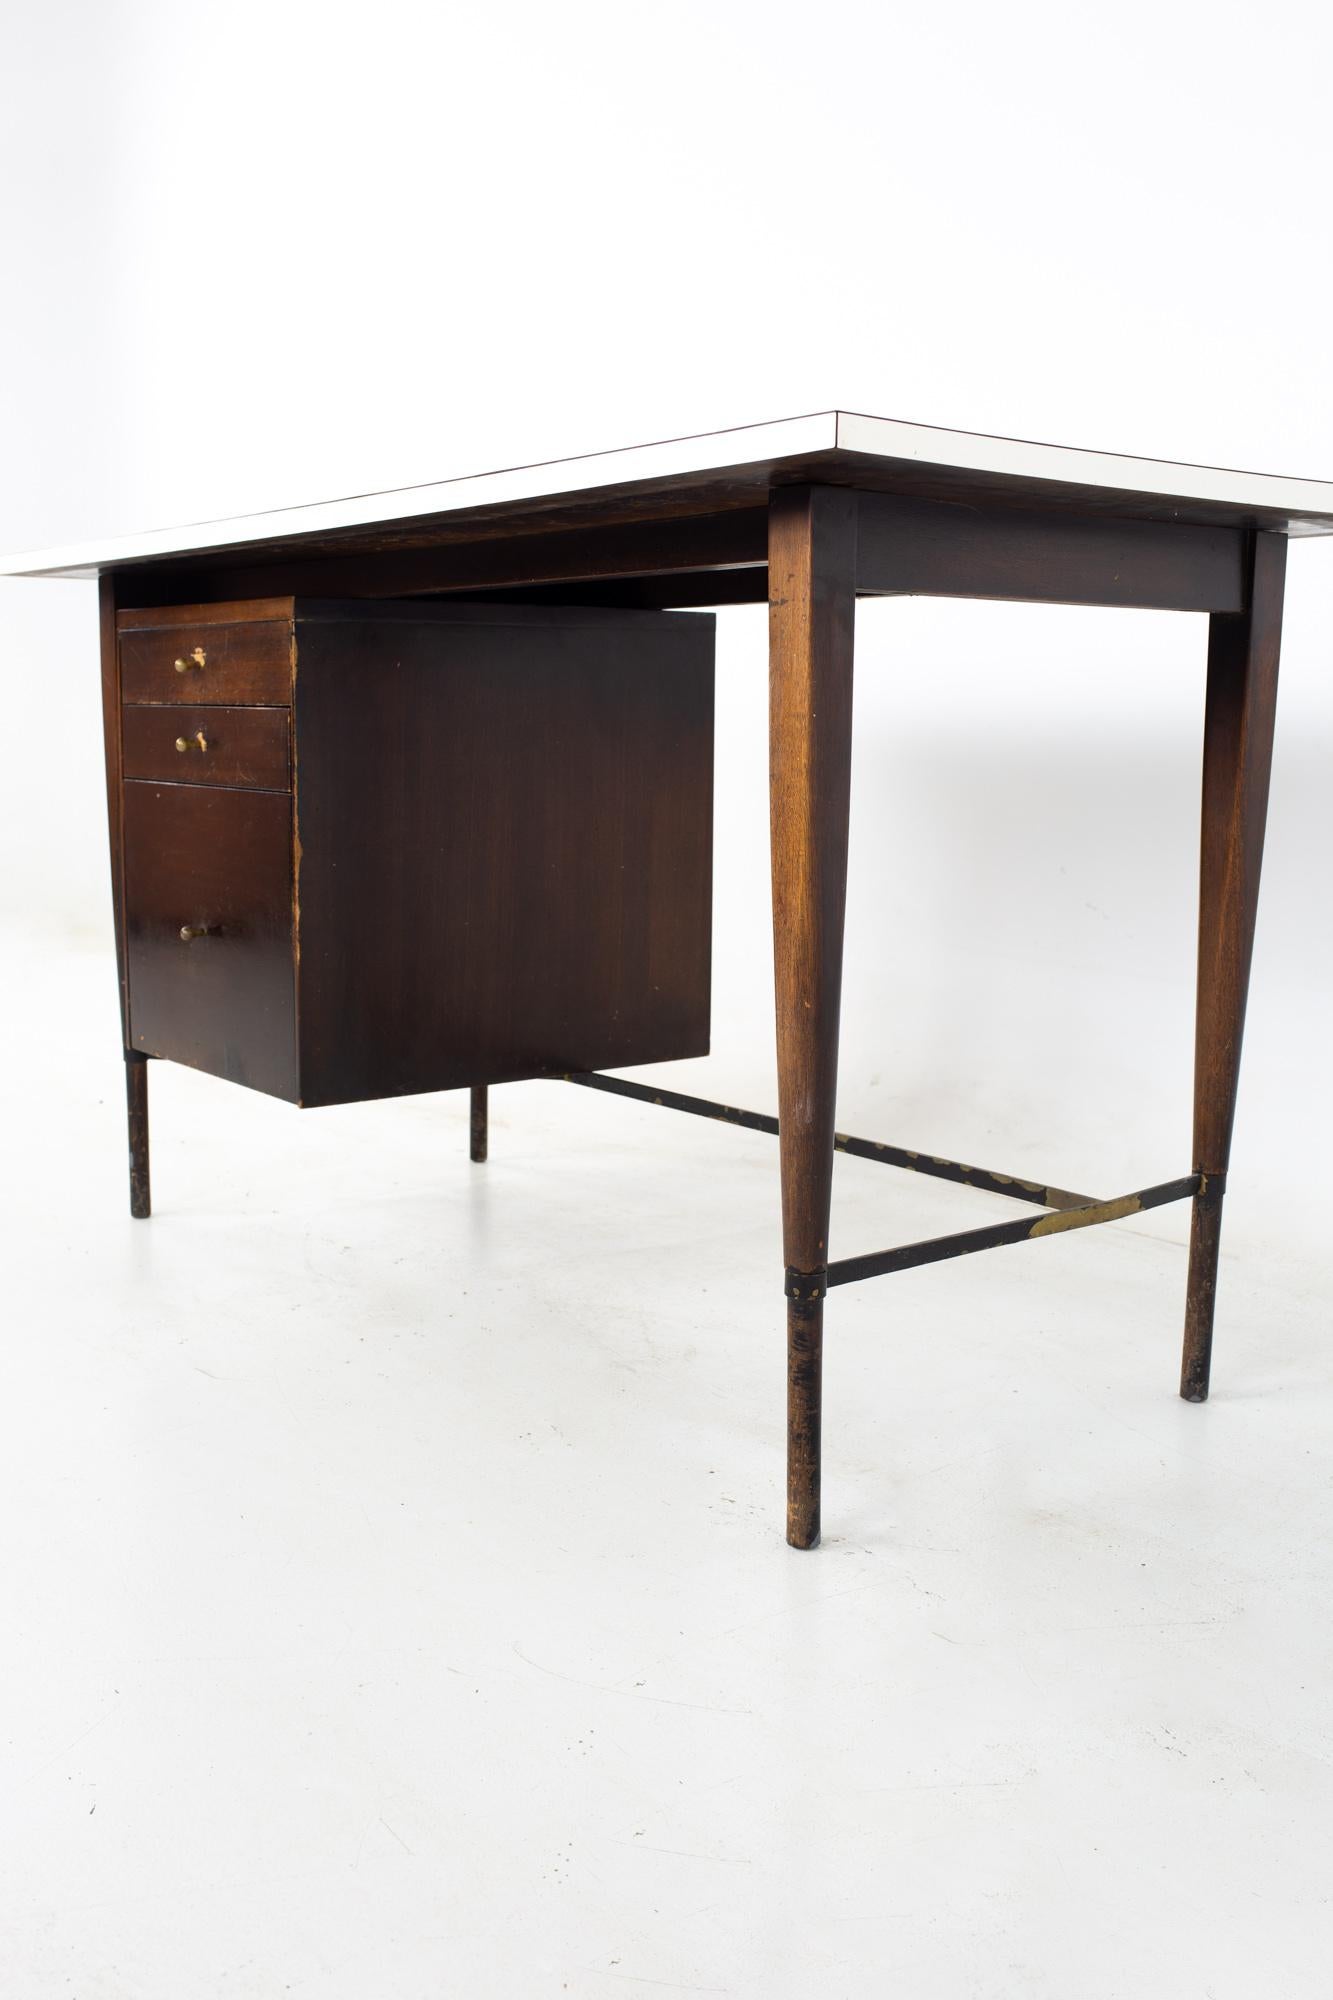 Paul McCobb for Calvin mid century ebonized mahogany brass and white laminate desk
Desk measures: 54.5 wide x 26 deep x 29 inches high, with a chair clearance of 26.5 inches 

All pieces of furniture can be had in what we call restored vintage